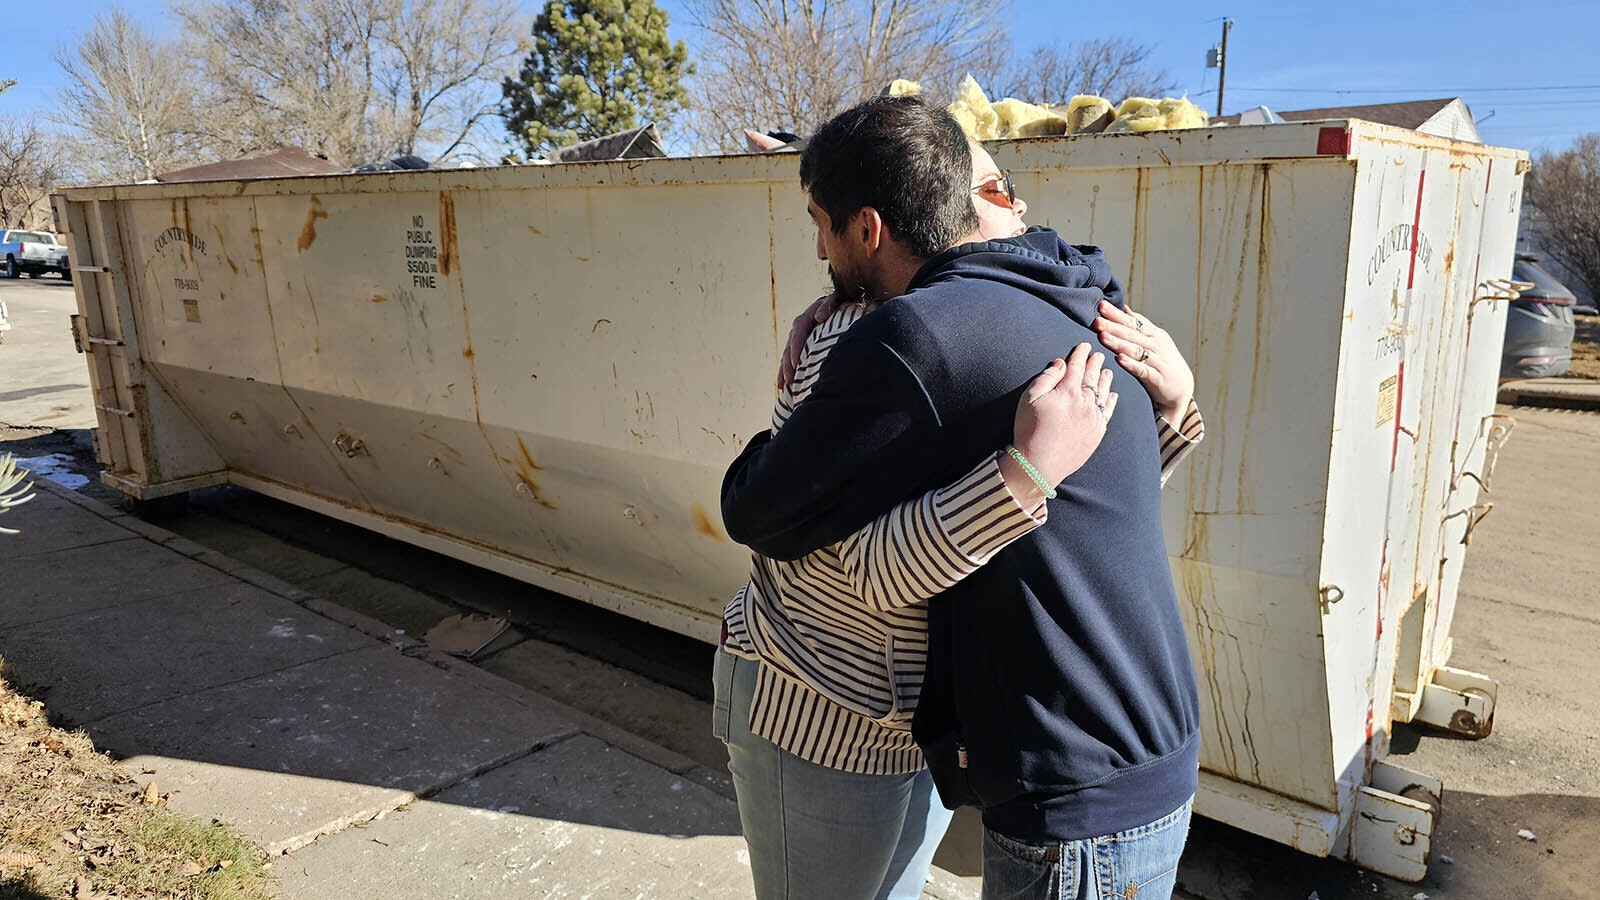 Landyn Medina gives Phylicia Peterson a hug Tuesday morning in front of a dumpster that's quickly filling up with waterlogged insulation and drywall, as well as her now nonfunctional washing machine. Peterson's home has sustained $80,000 in damages after a city water main busted and inundated several homes in the area of Cahill Park.